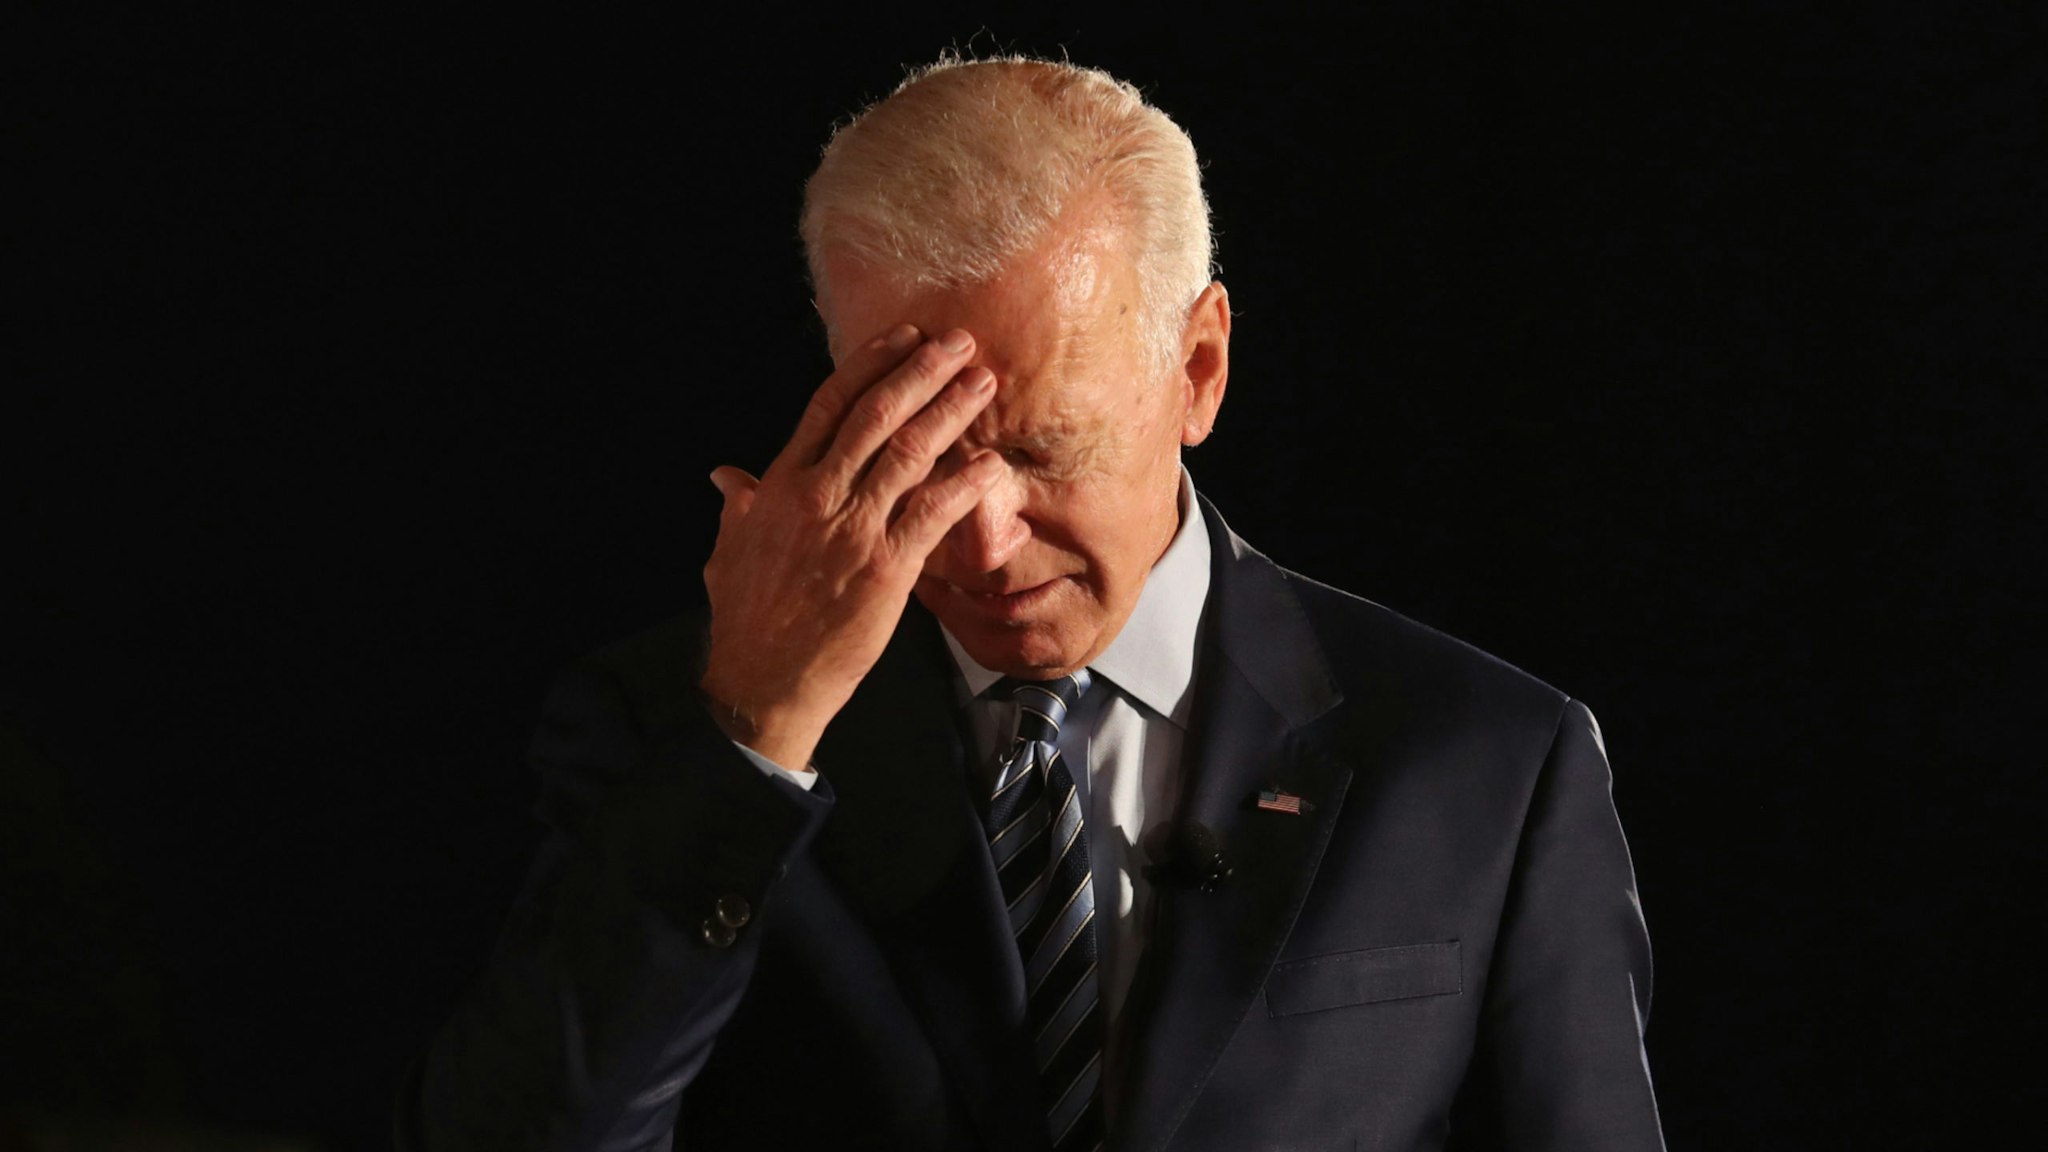 Democratic presidential candidate former U.S. Vice President Joe Biden pauses as he speaks during the AARP and The Des Moines Register Iowa Presidential Candidate Forum at Drake University on July 15, 2019 in Des Moines, Iowa.